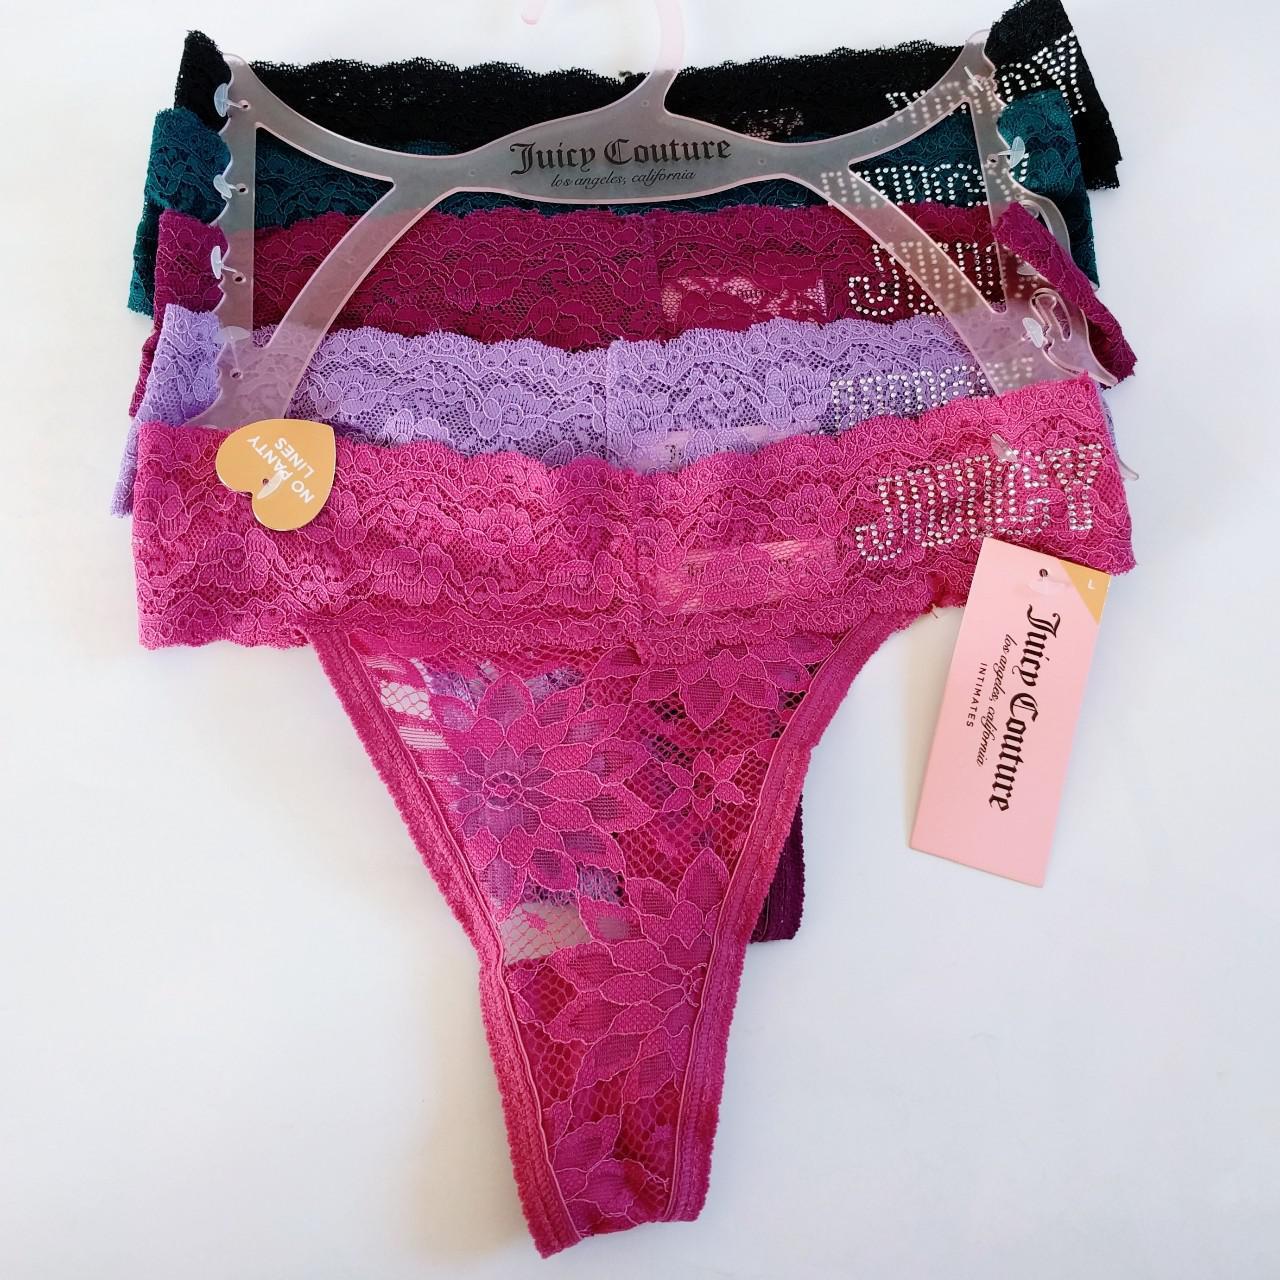 New with tags. Juicy Couture Intimate Lace Cheeky